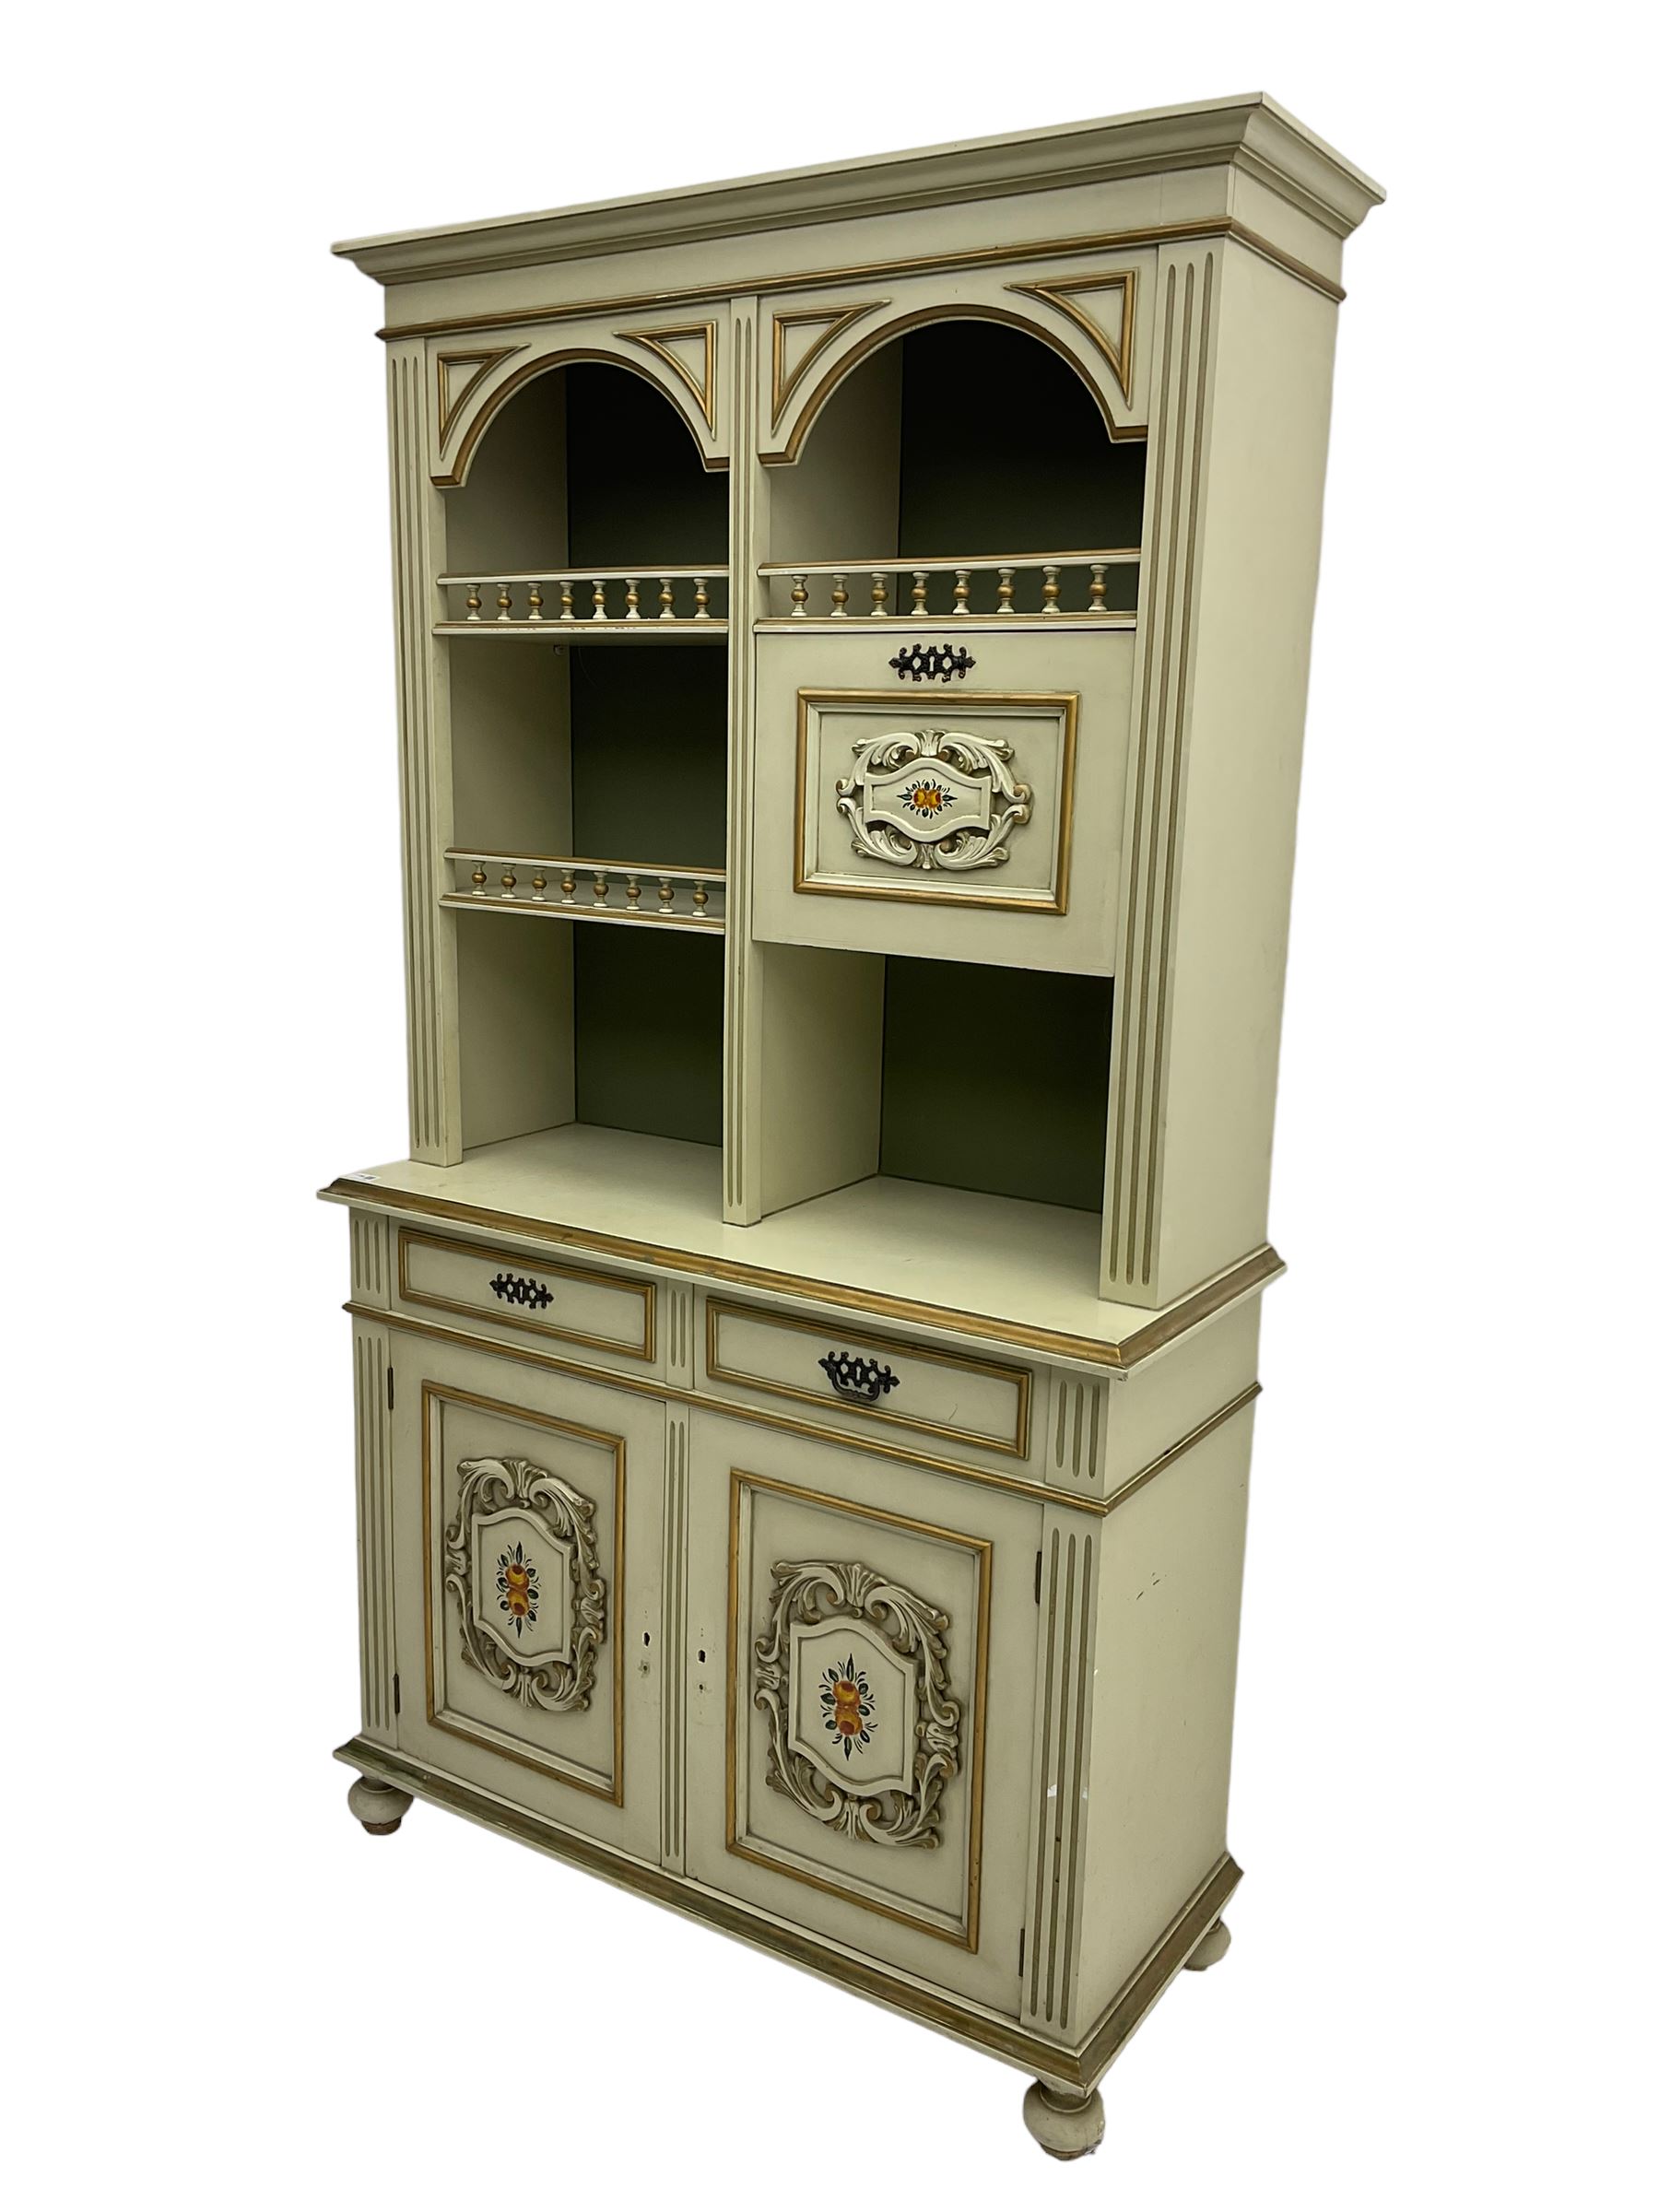 Portuguese painted dresser - Image 3 of 6